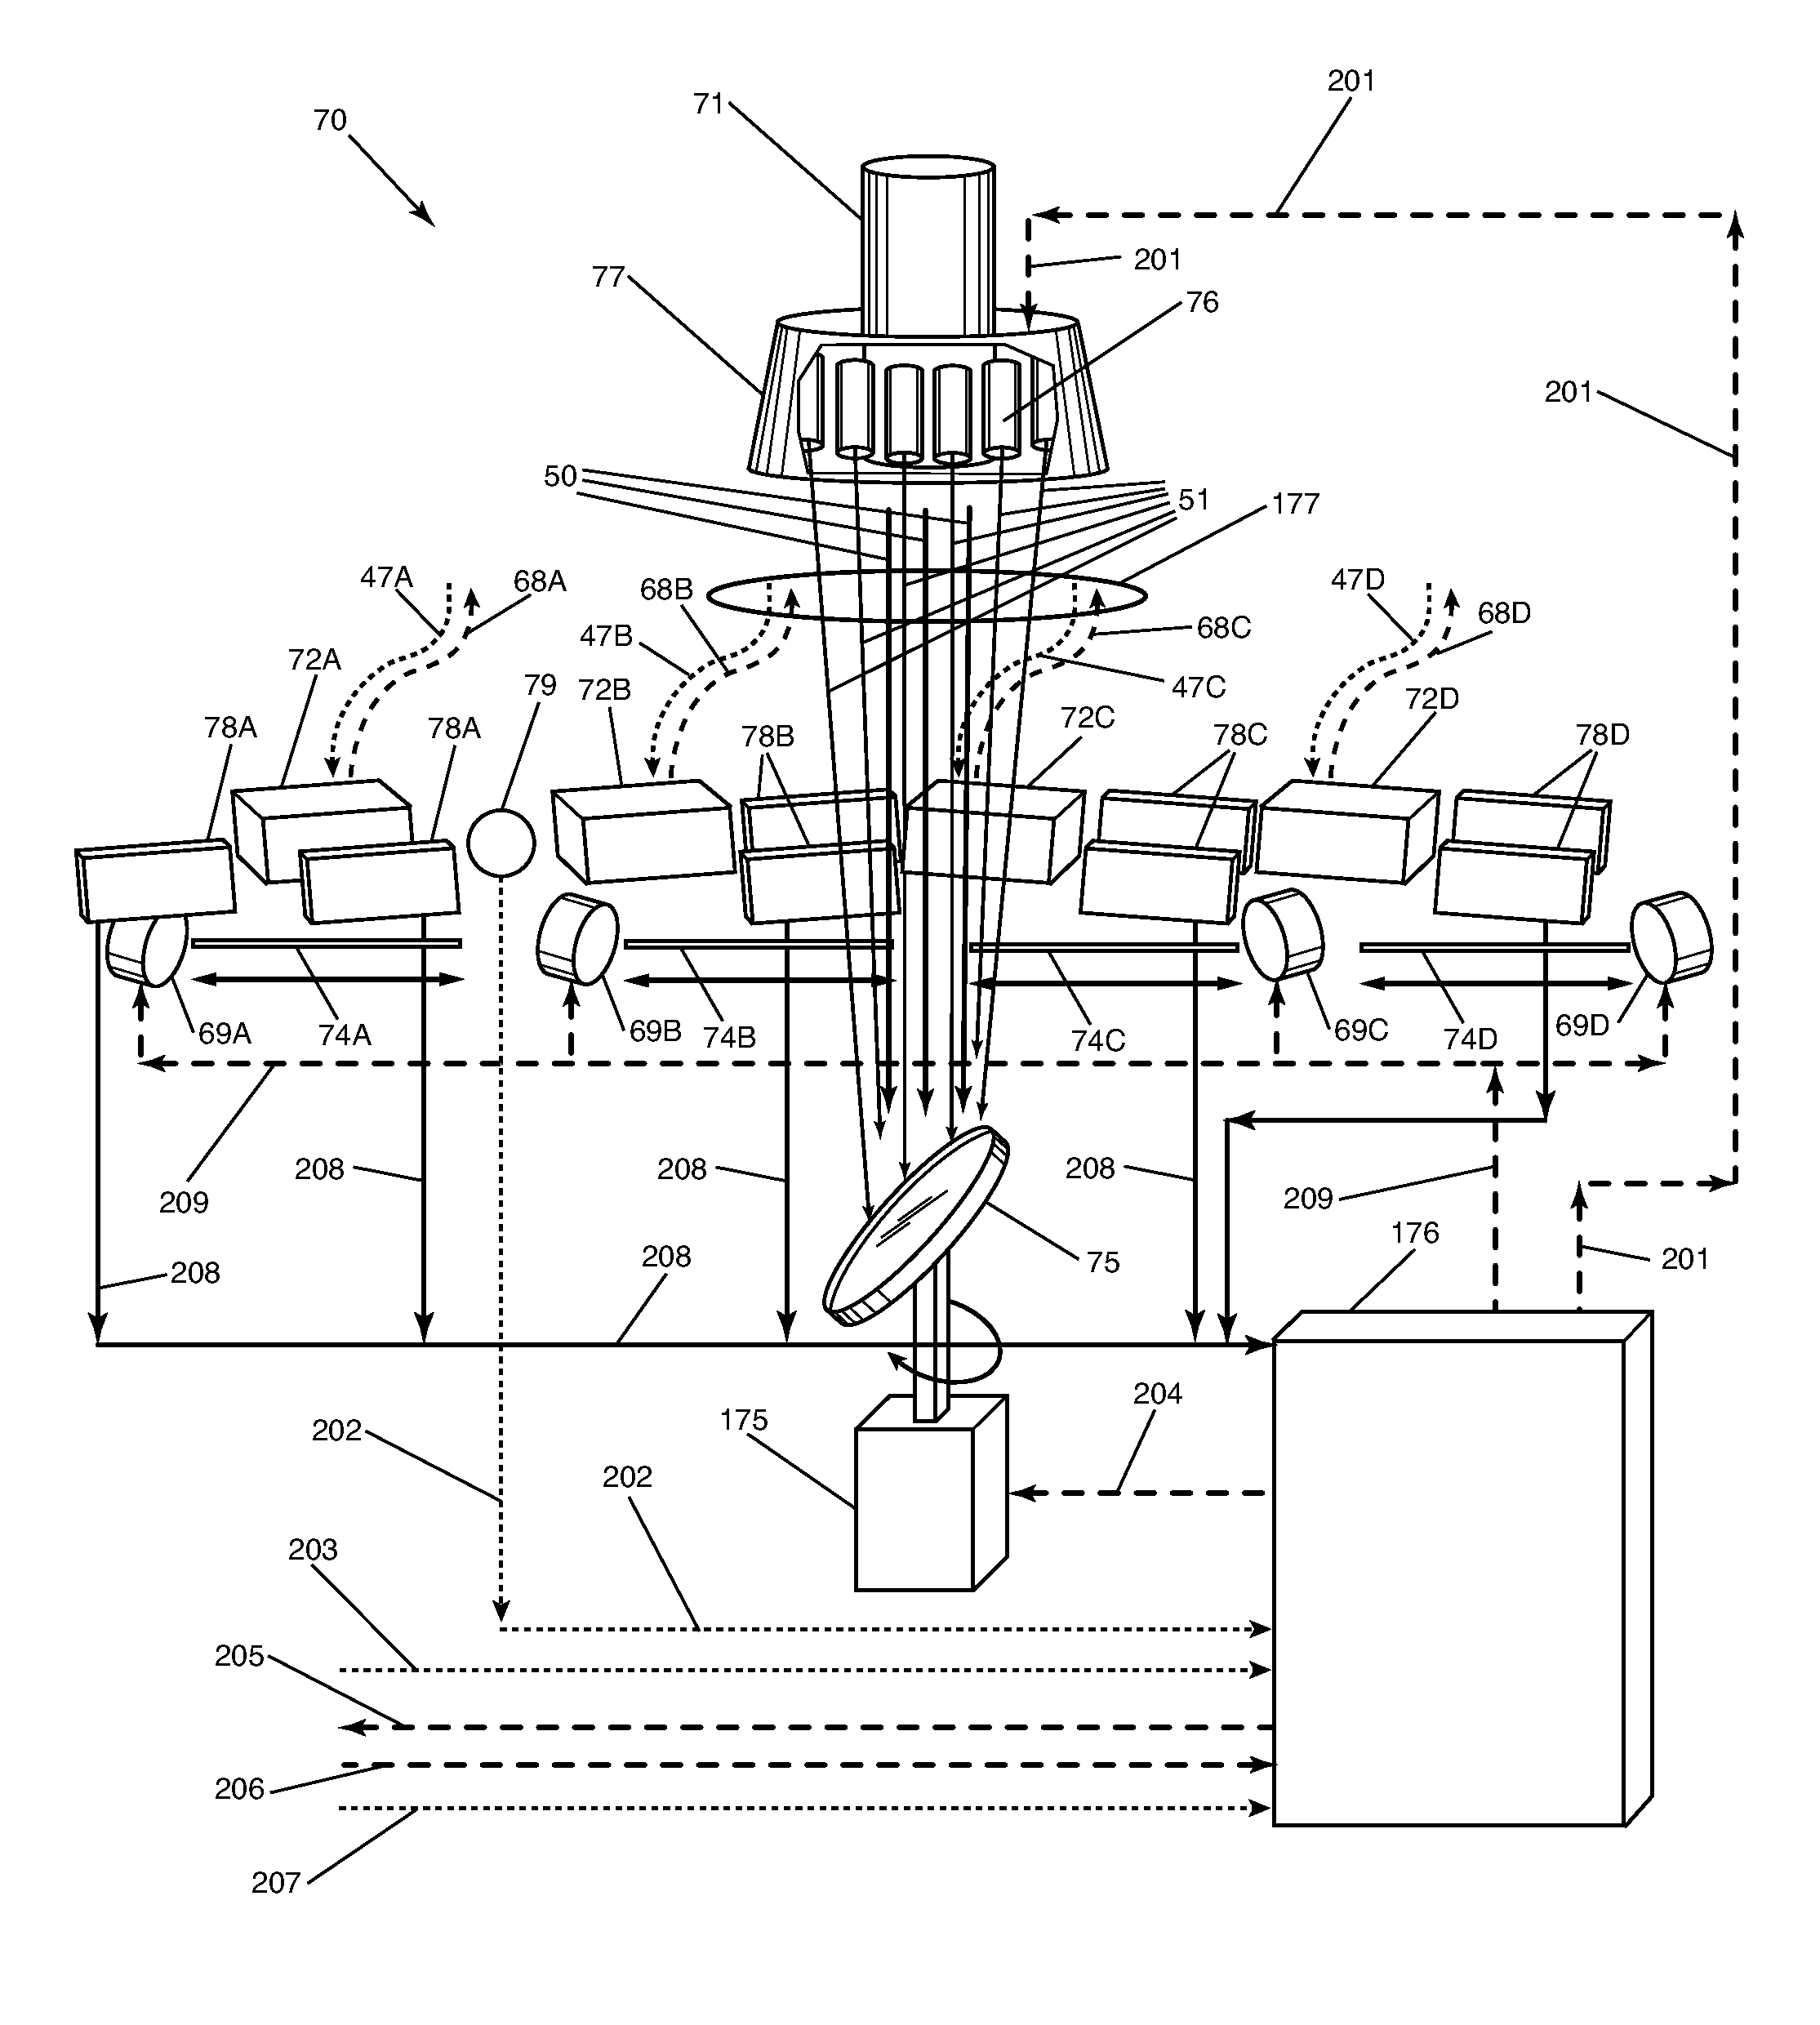 Apparatus and Method for Collecting and Distributing Radiation